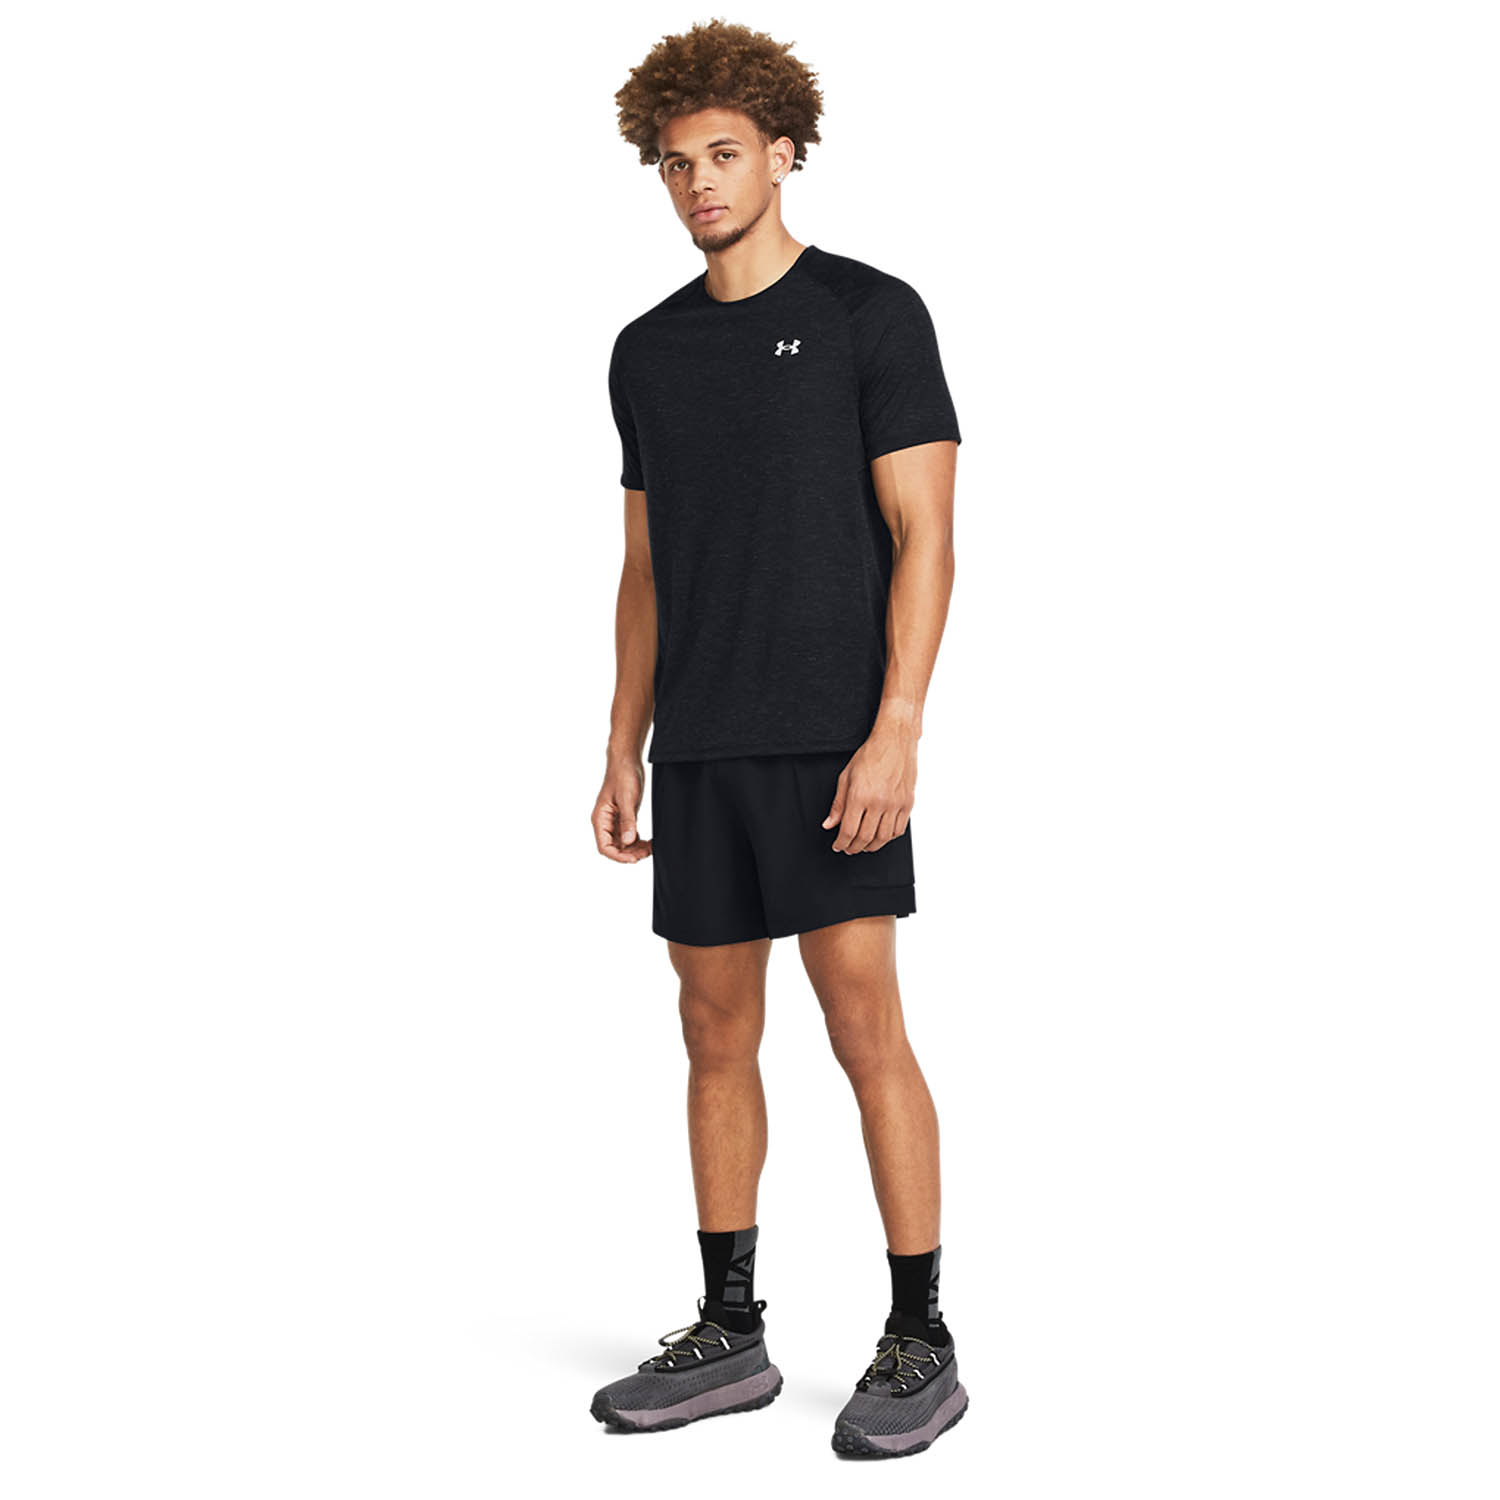 Under Armour Launch Logo 5in Shorts - Black/Reflective